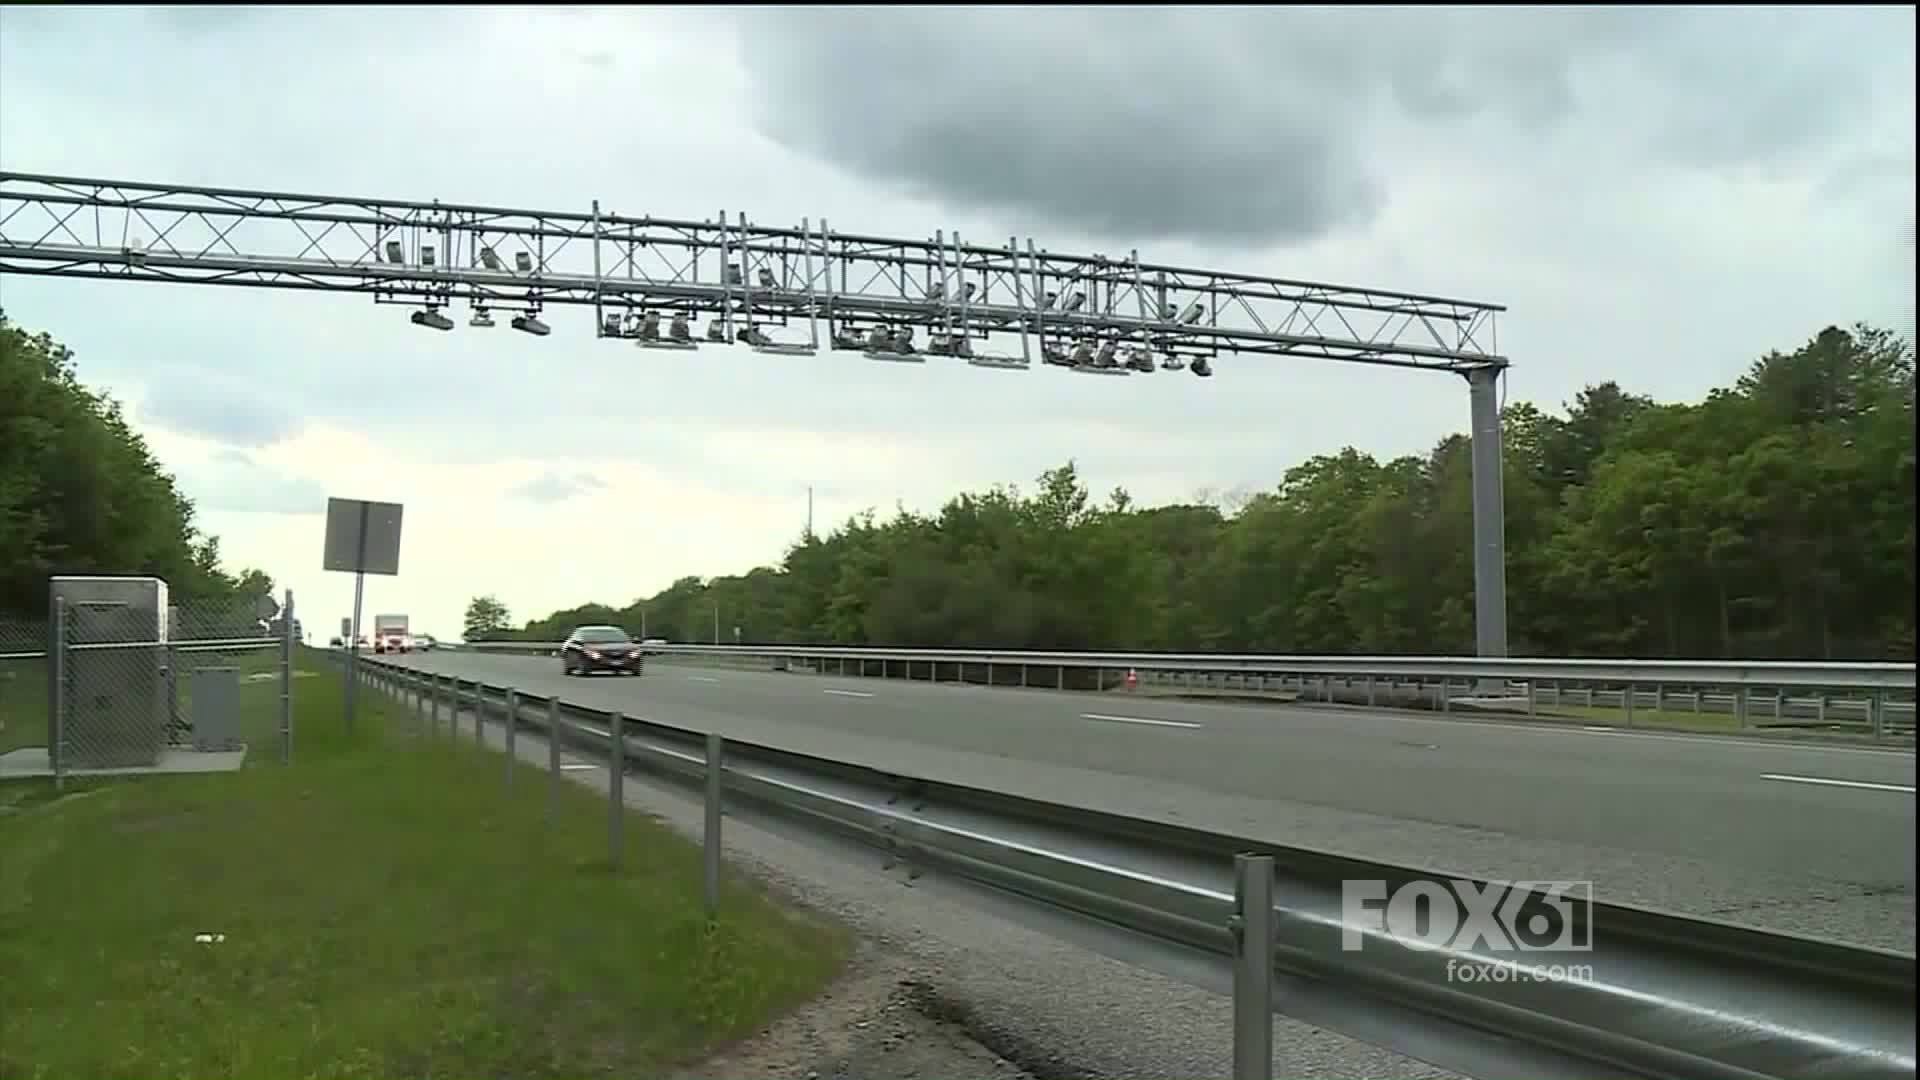 Tolls and marijuana - issues Connecticut will face in 2019